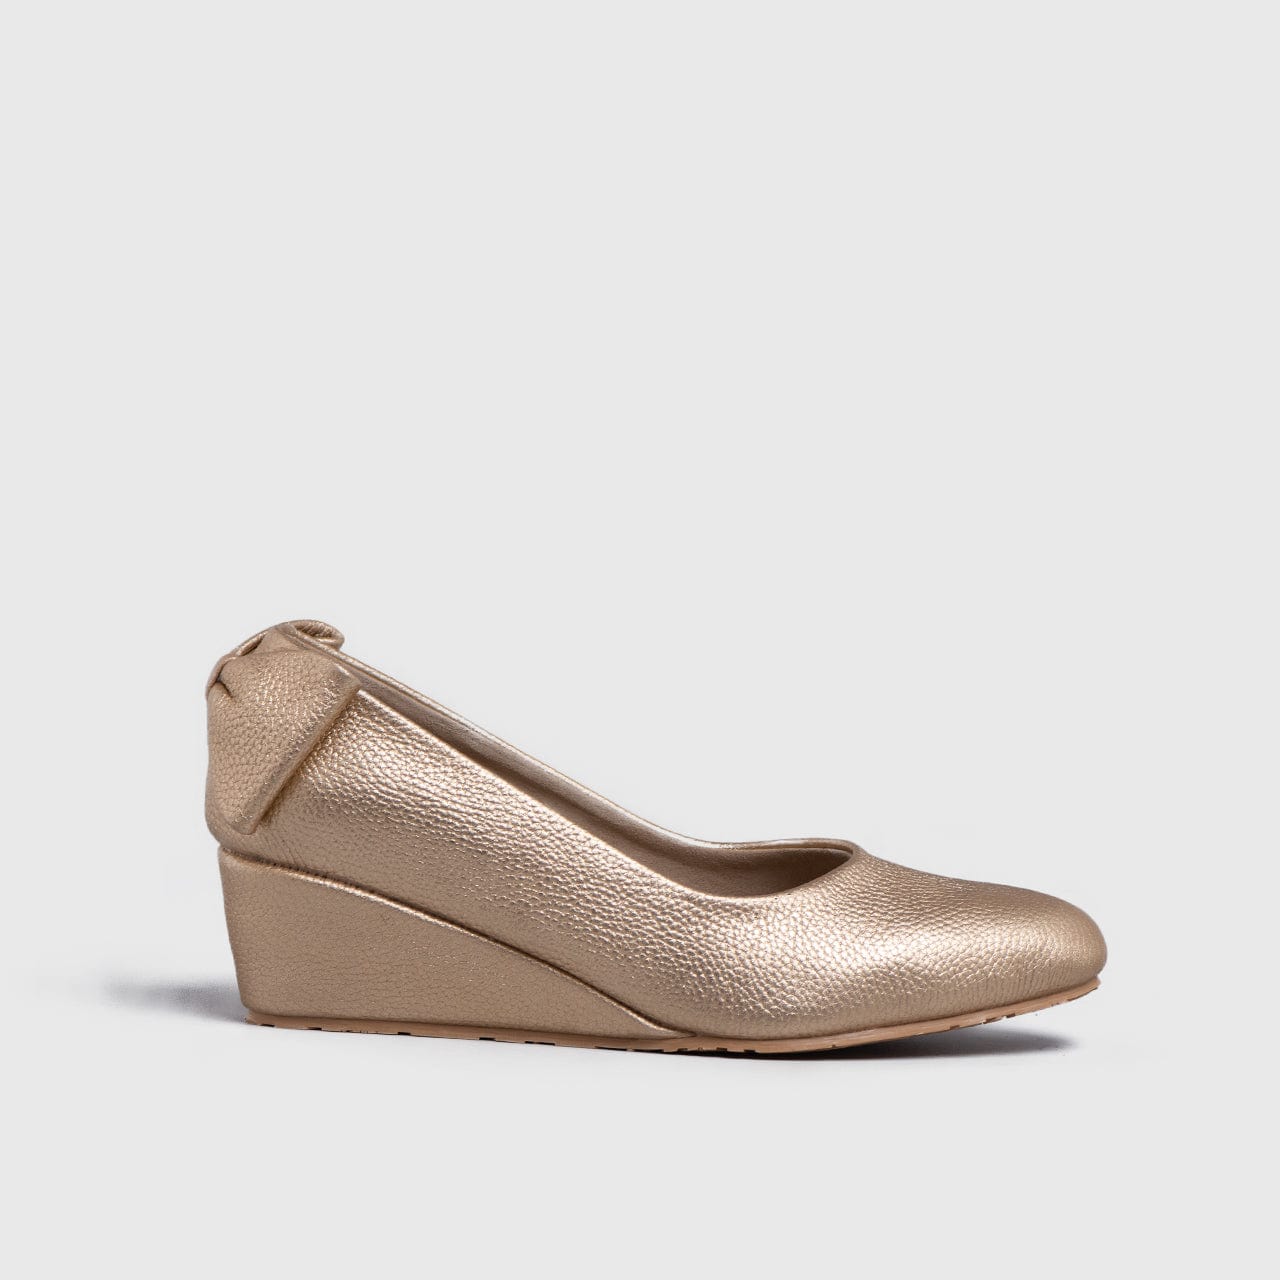 Adorable Projects Official Galitzi Mini Wedges Genuine Leather Gold